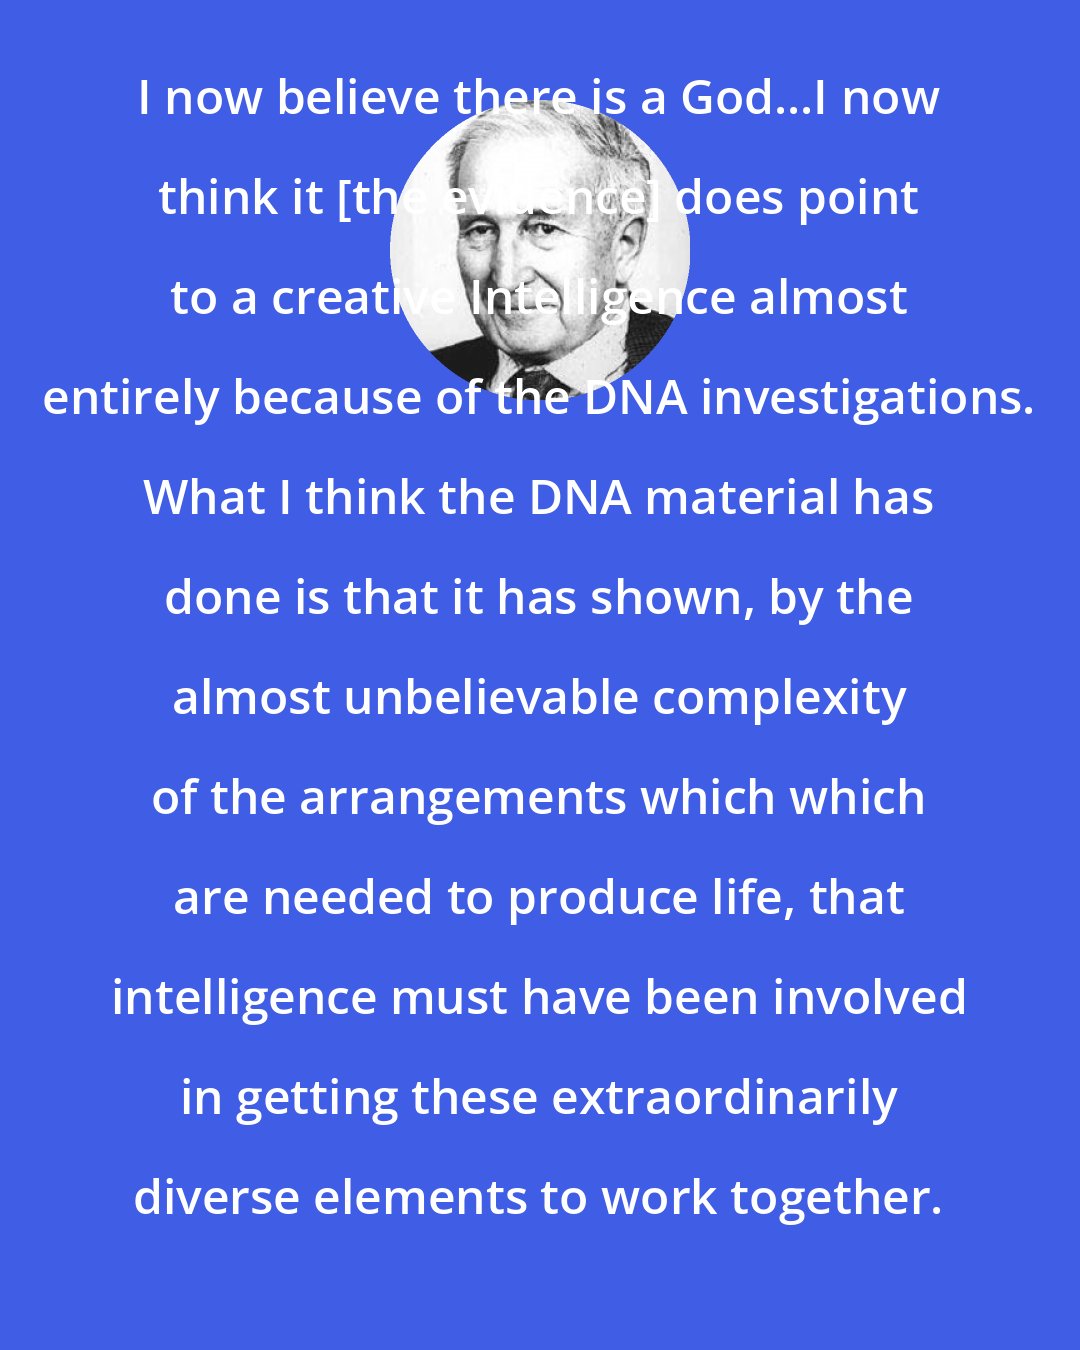 Antony Flew: I now believe there is a God...I now think it [the evidence] does point to a creative Intelligence almost entirely because of the DNA investigations. What I think the DNA material has done is that it has shown, by the almost unbelievable complexity of the arrangements which which are needed to produce life, that intelligence must have been involved in getting these extraordinarily diverse elements to work together.